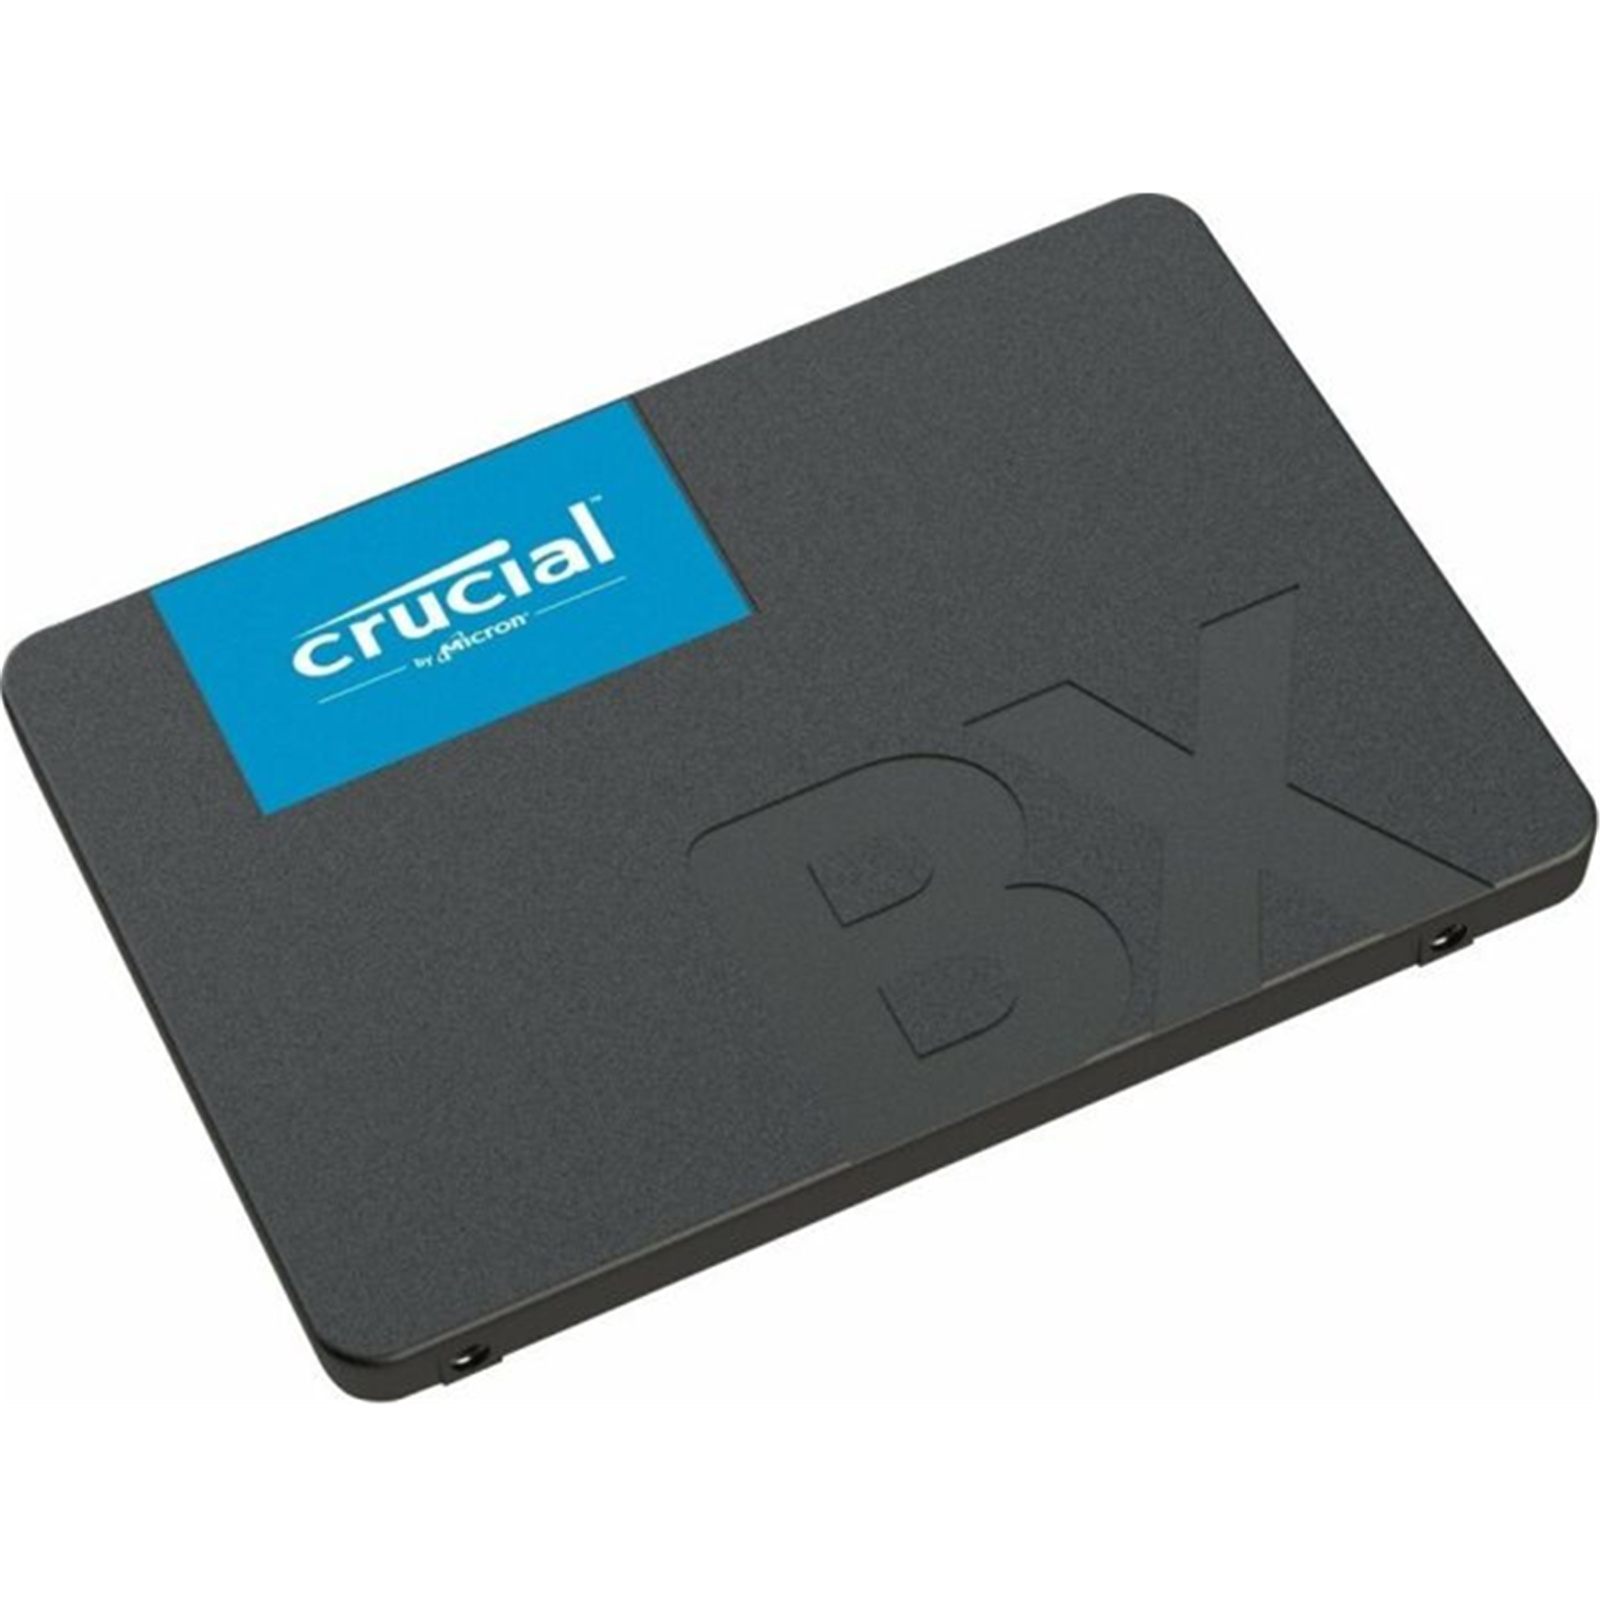 Buy the Crucial BX500 1TB 2.5" Internal SSD SATA 6GB/s - Up to 540MB/s Read  -... ( CT1000BX500SSD1 ) online - PBTech.com